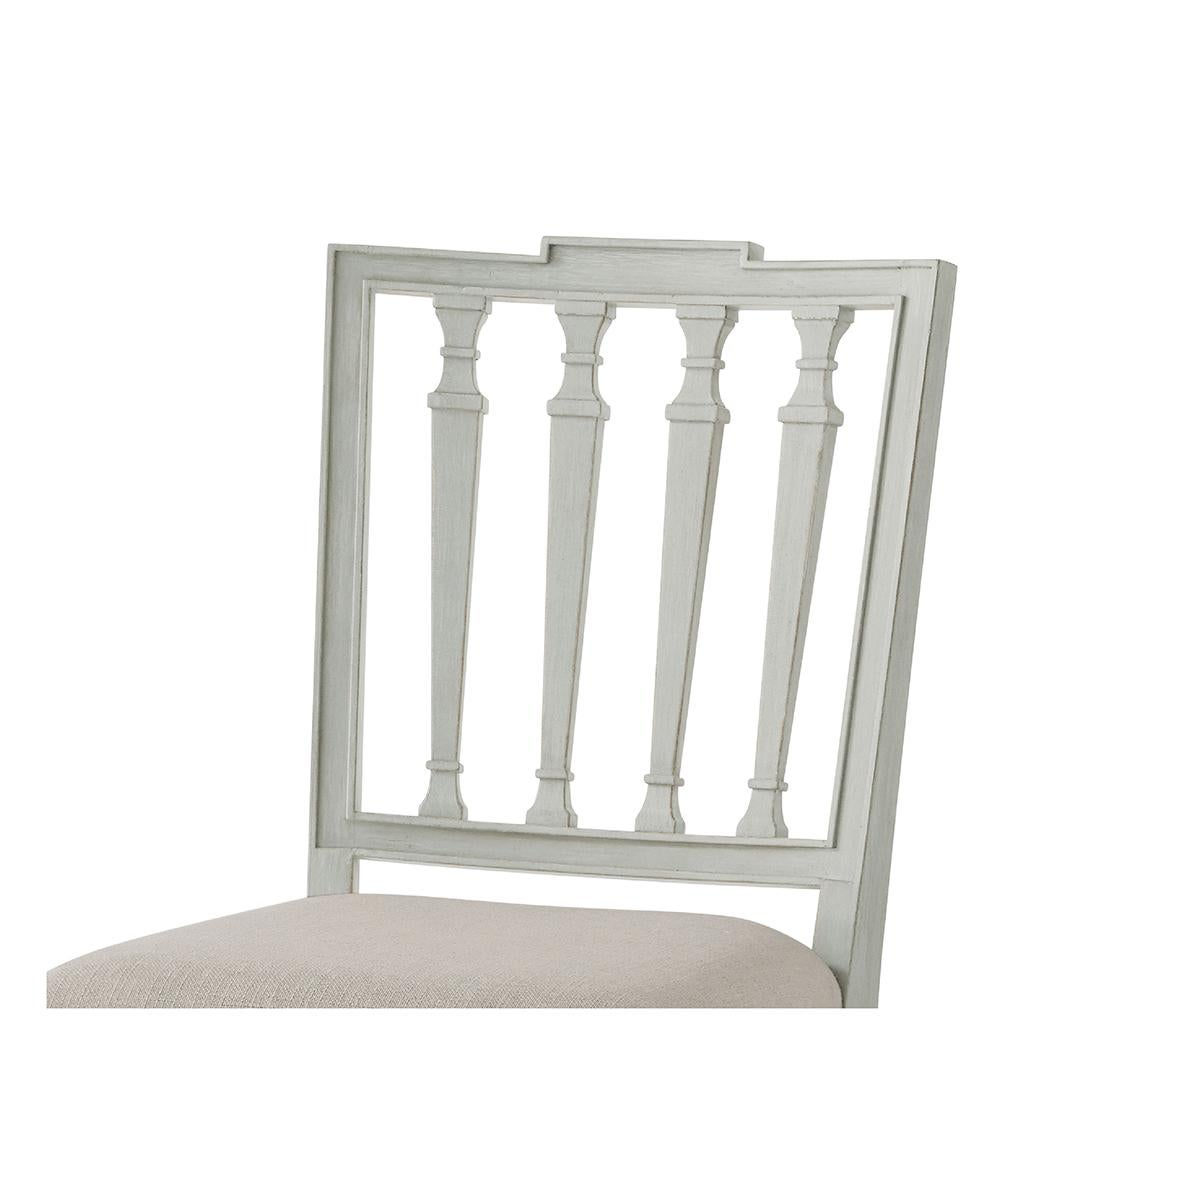 hand-carved from beech, painted in our Elsa finish and has a square crested back with tapered pilaster carved slats with an upholstered seat and raised on square tapering legs. Shown in Draper performance fabric.

Dimensions: 18.5